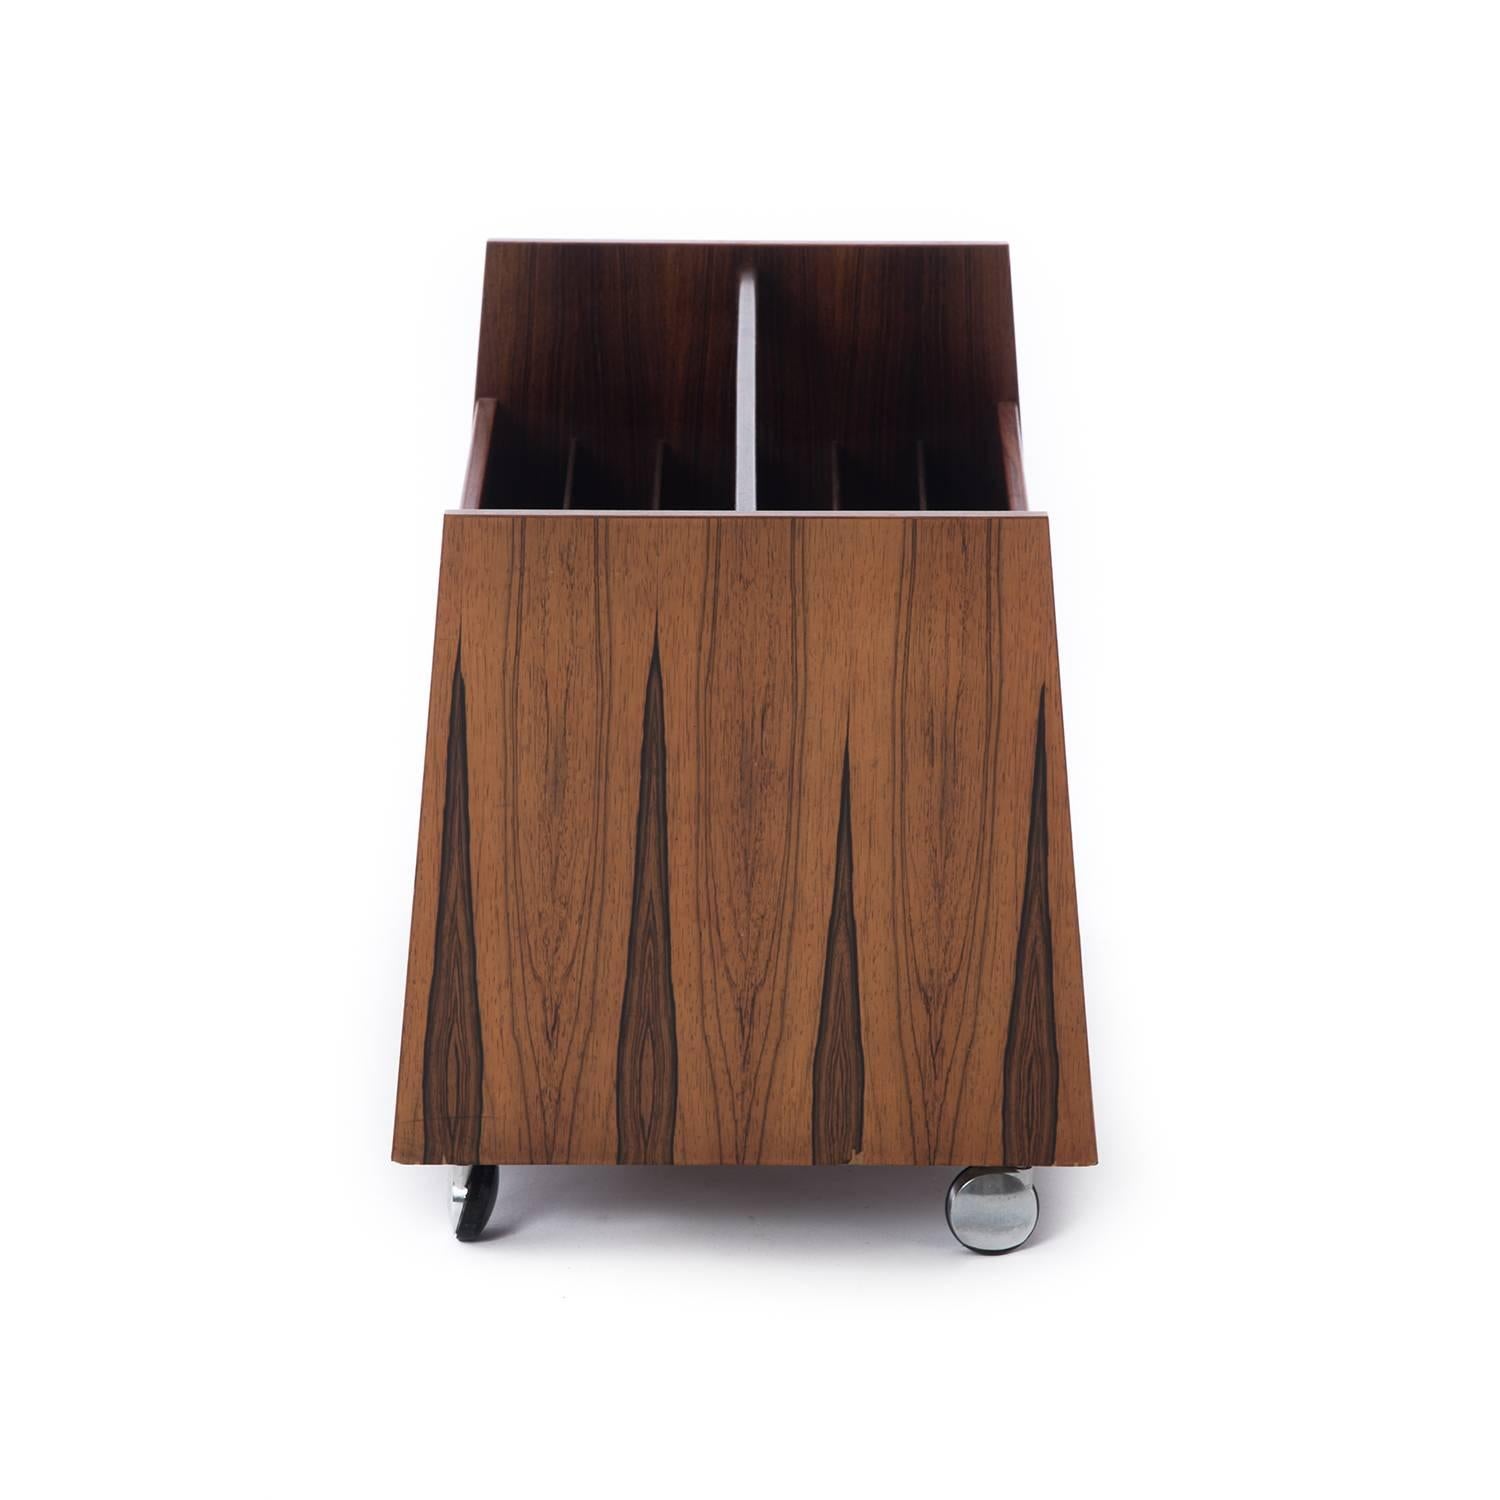 This handy and stylish piece is made of rosewood. Originally intended as a record album storage unit it can easily double as the ultimate magazine holder.

Professional, skilled furniture restoration is an integral part of what we do every day.